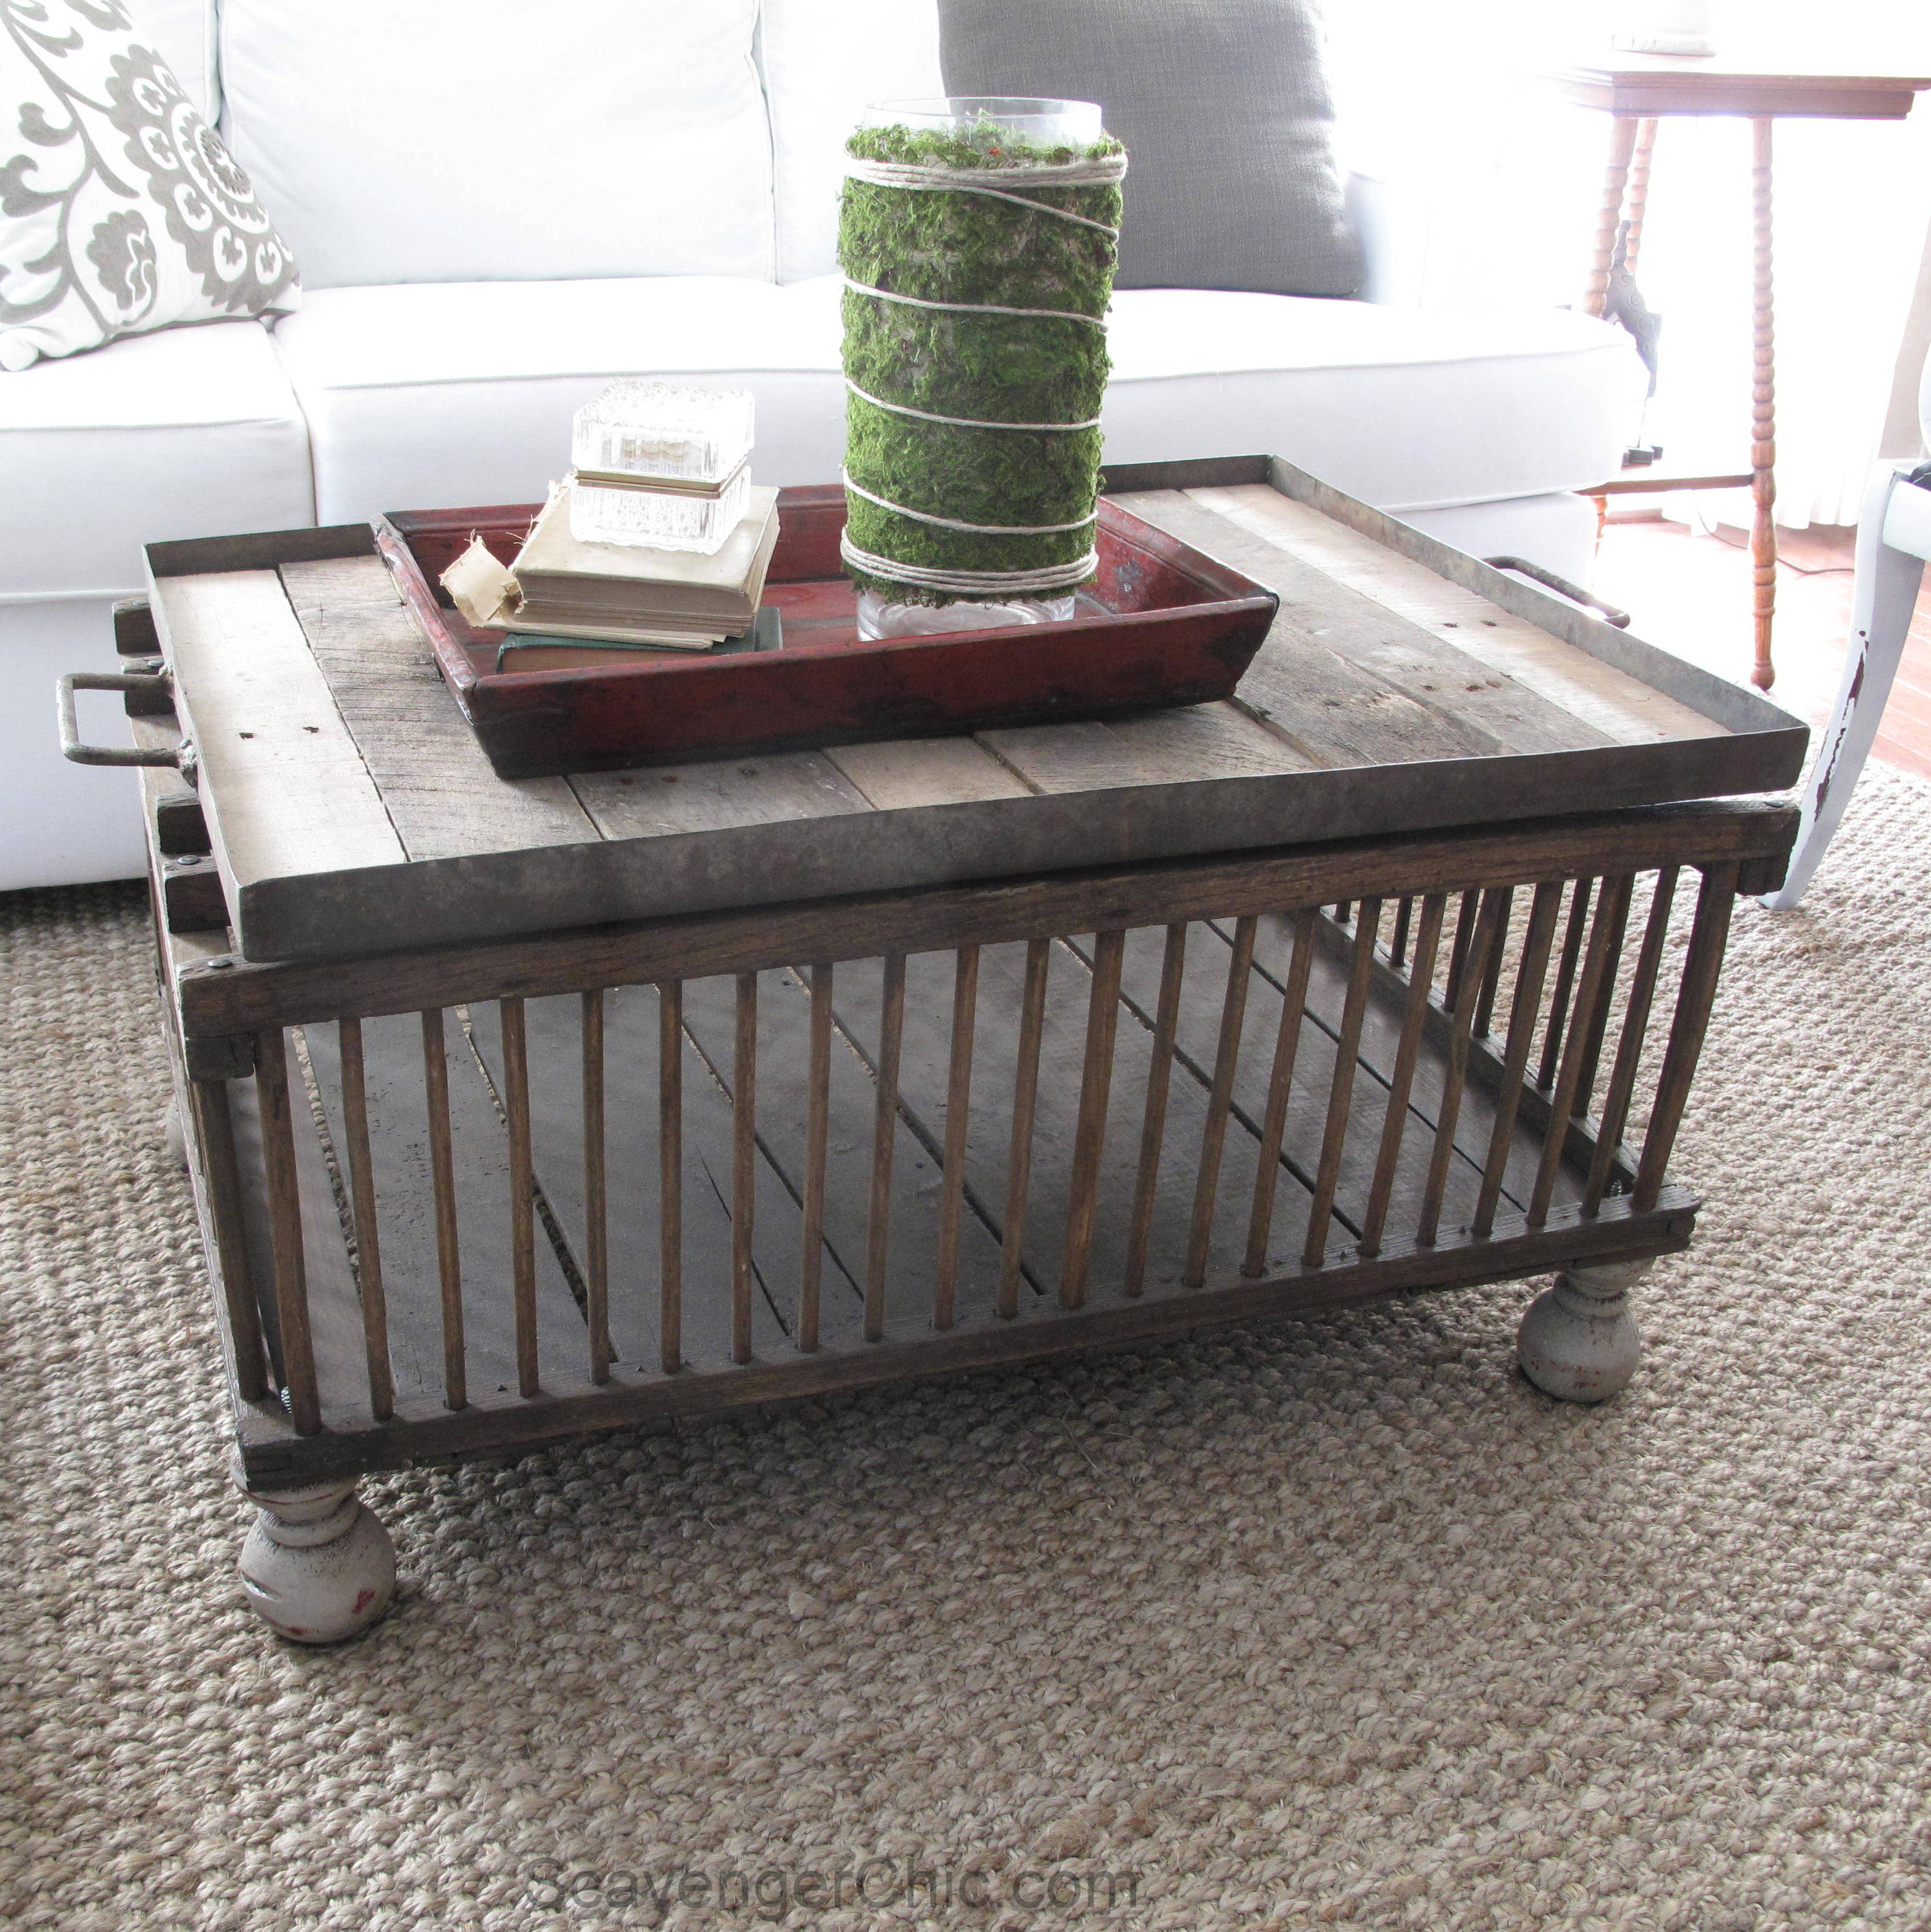 Chicken Coop Coffee Table diy - Scavenger Chic